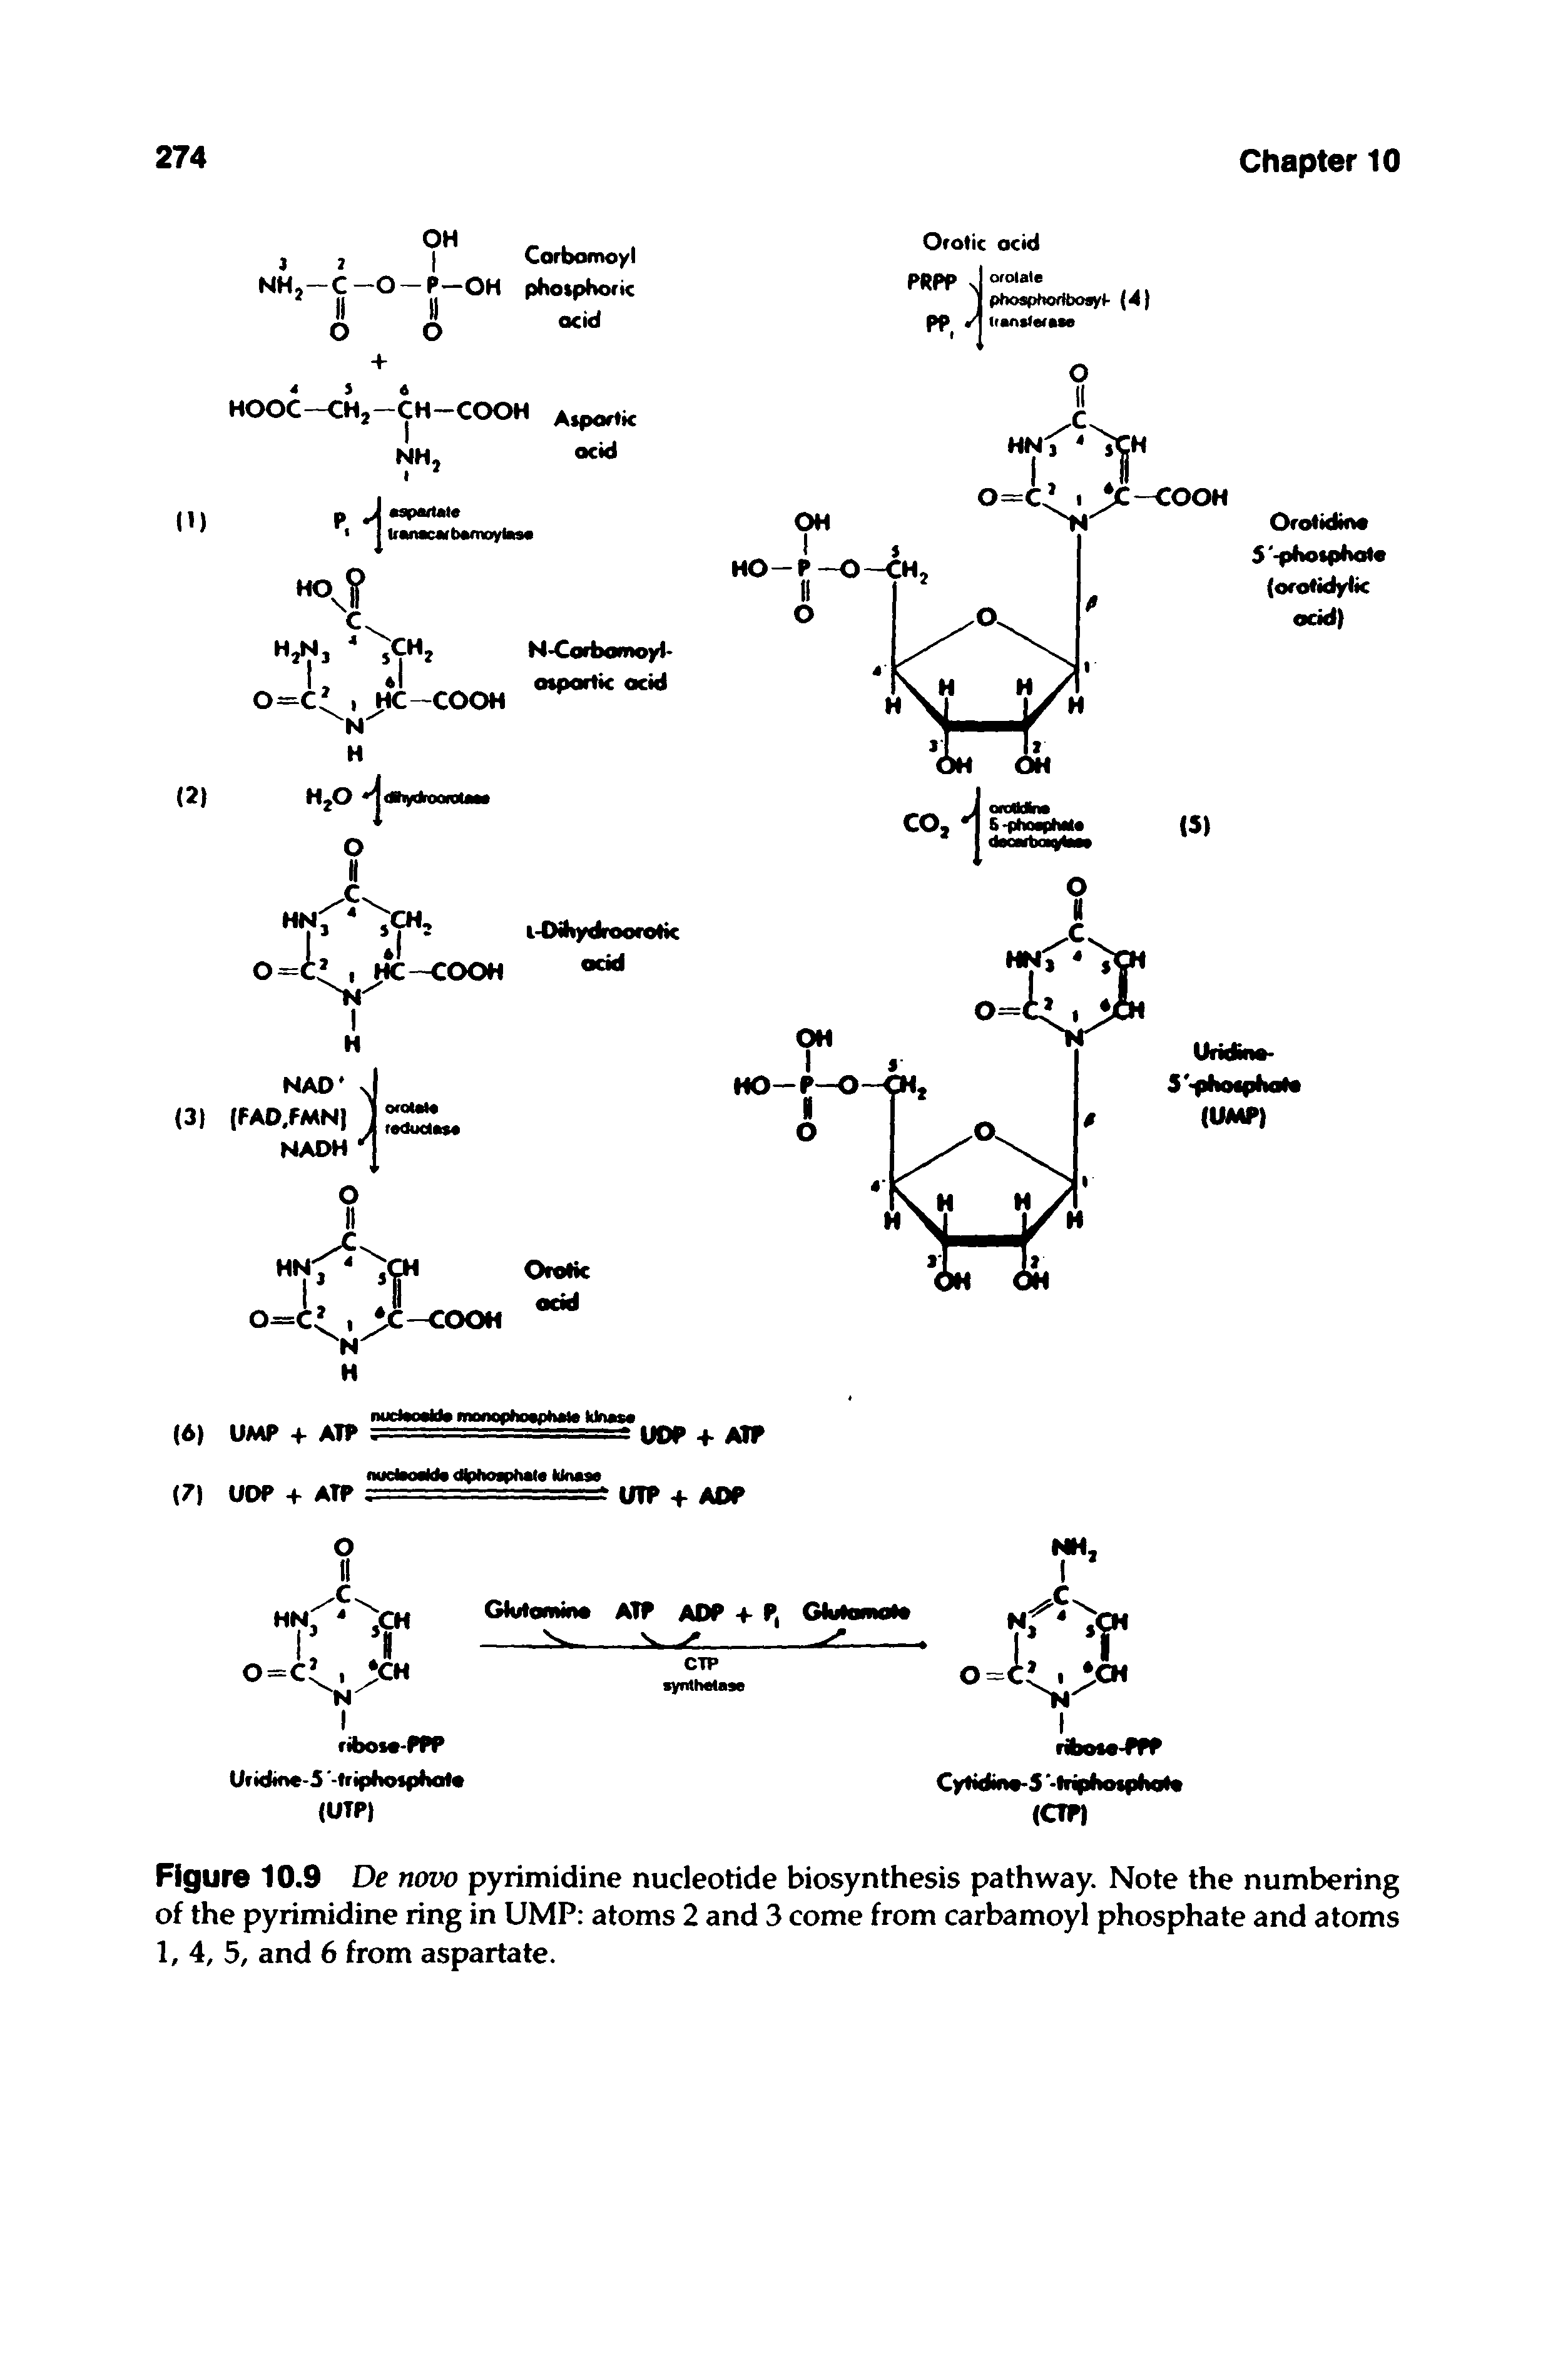 Figure 10.9 De now pyrimidine nucleotide biosynthesis pathway. Note the numbering of the pyrimidine ring in UMP atoms 2 and 3 come from carbamoyl phosphate and atoms 1, 4, 5, and 6 from aspartate.